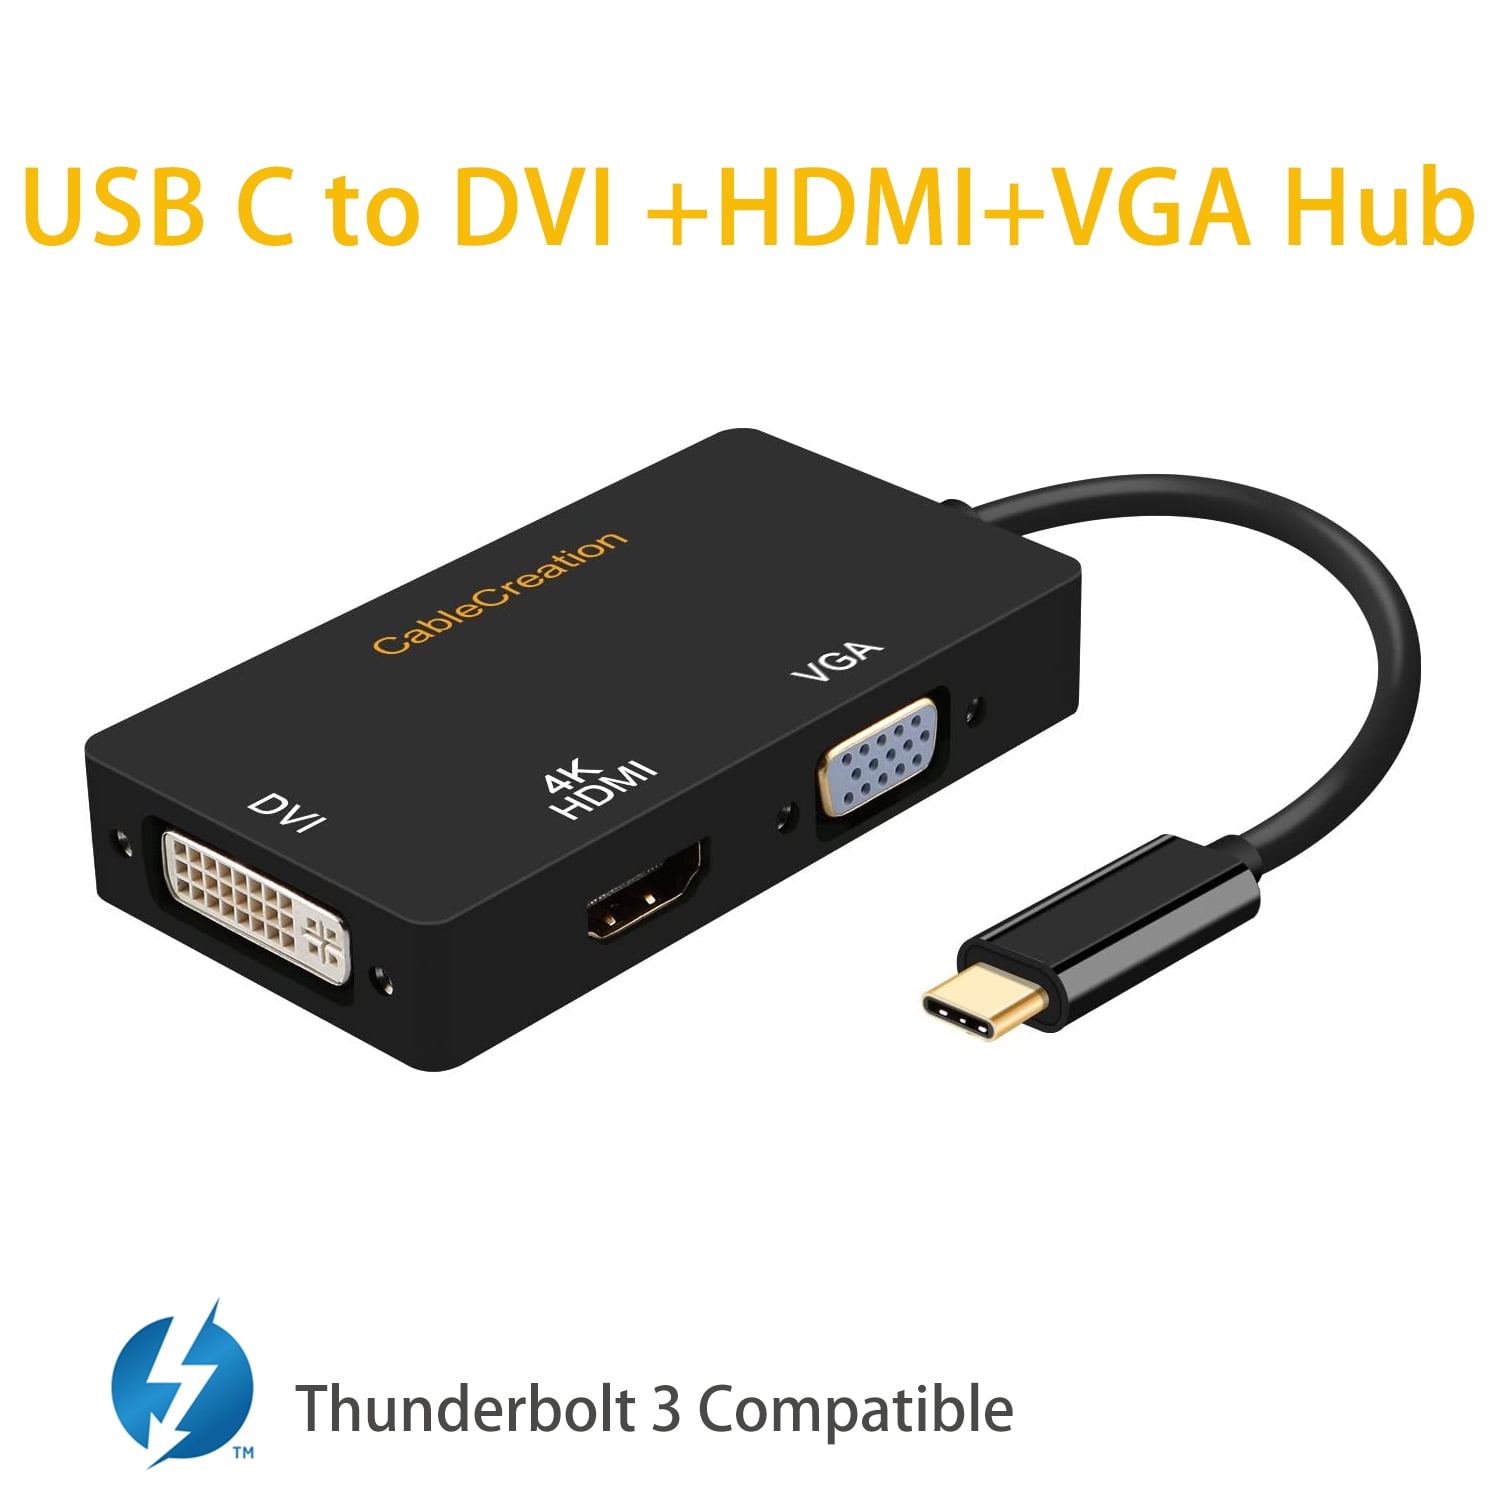 3 in USB C to VGA HDMI DVI Adapter, CableCreation USB Type C to HDMI VGA DVI Female Converter, Compatible with MacBook Pro Surface Book 2, ChromeBook Pixel, Mac Mini